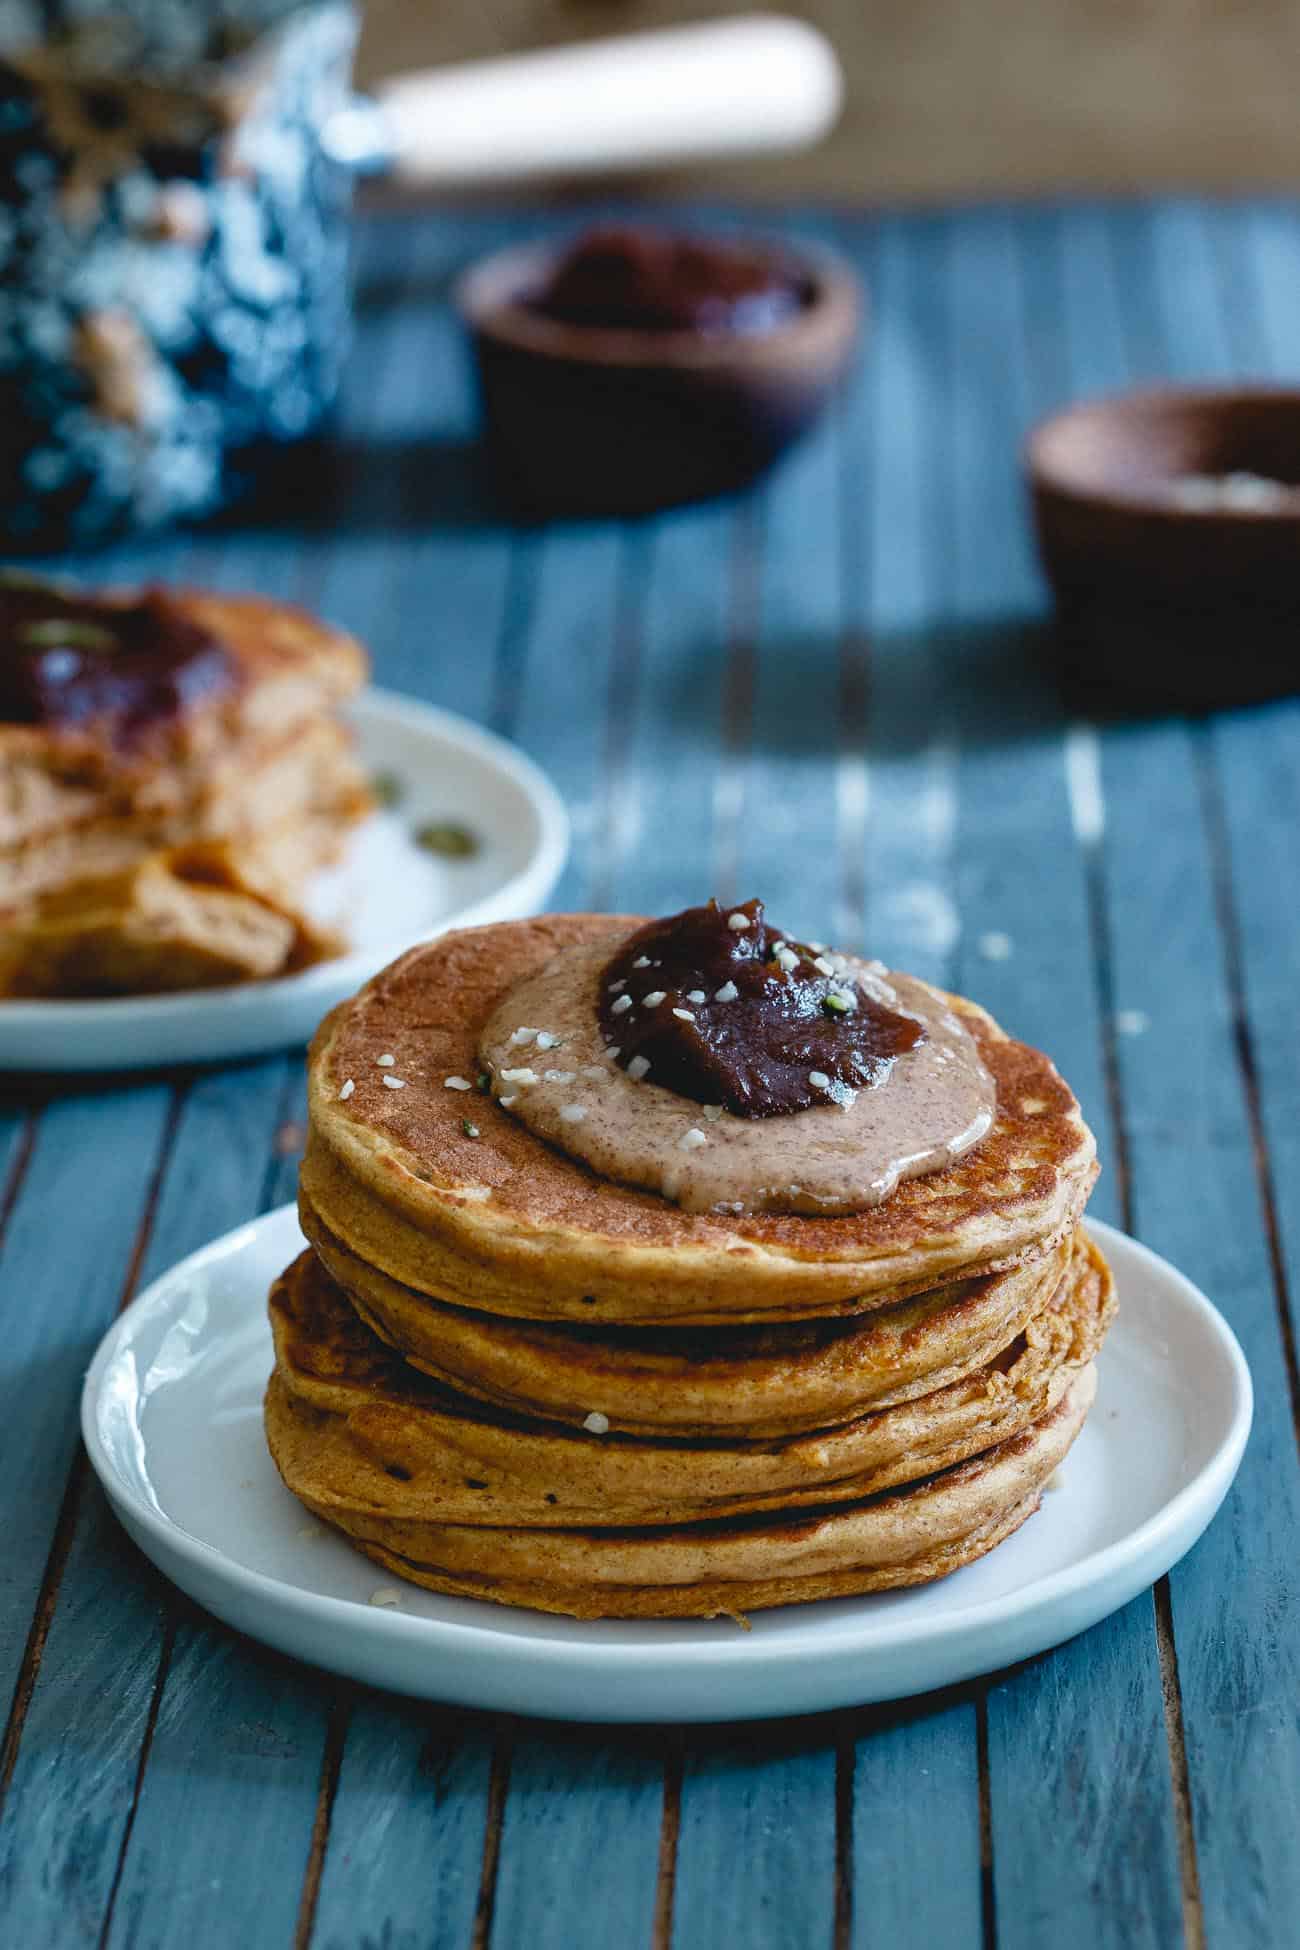 These pumpkin protein pancakes are a simple, fall recipe for pumpkin pancakes packed with protein (19 grams per serving!) to help keep you full longer. A healthy and delicious start to your day!